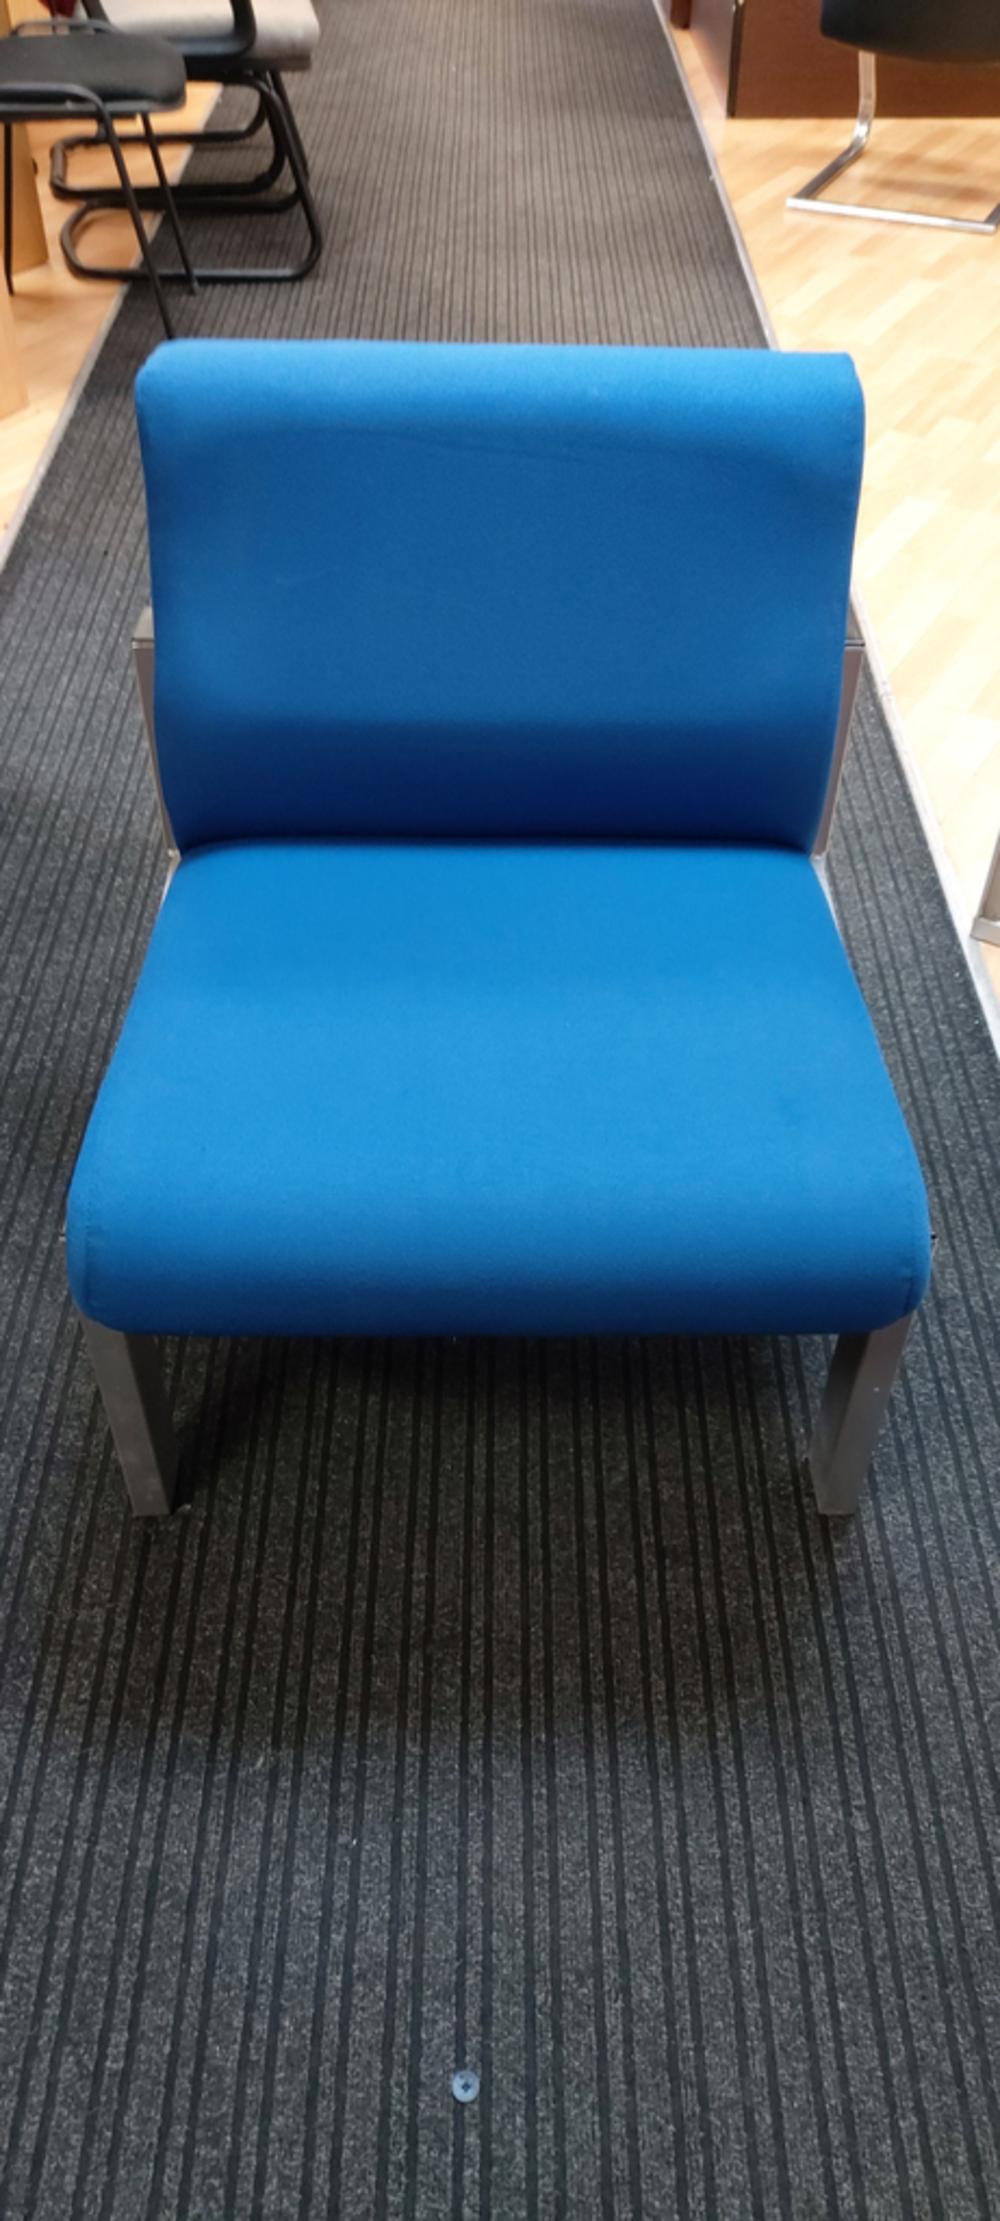 Low Level Blue Reception Chair